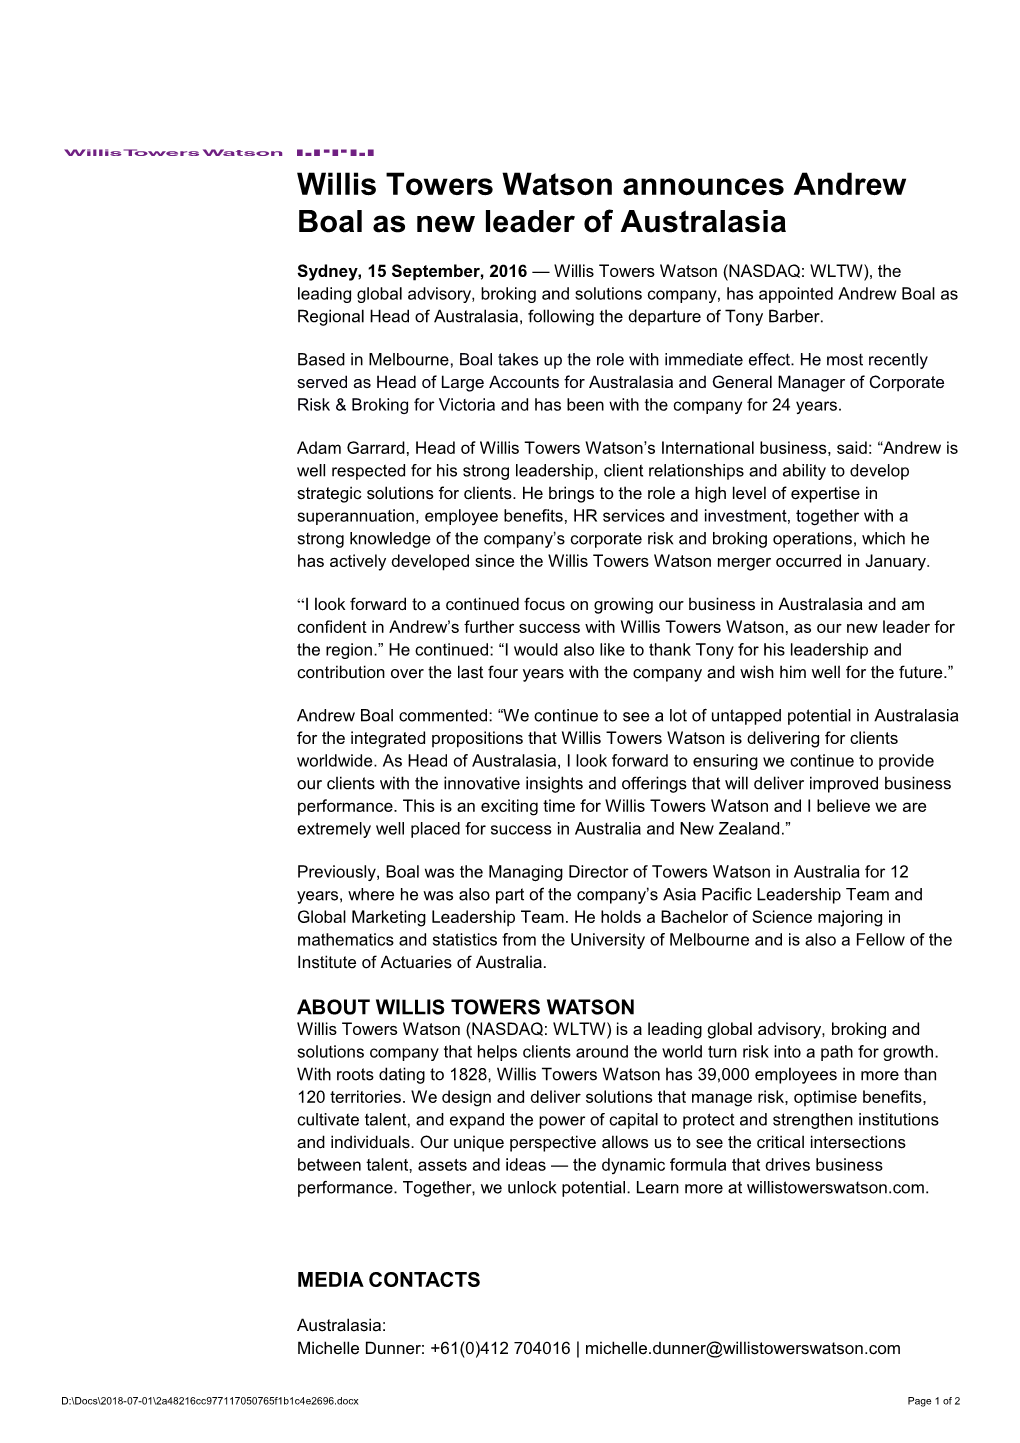 Willis Towers Watson Announces Andrew Boal As New Leader of Australasia